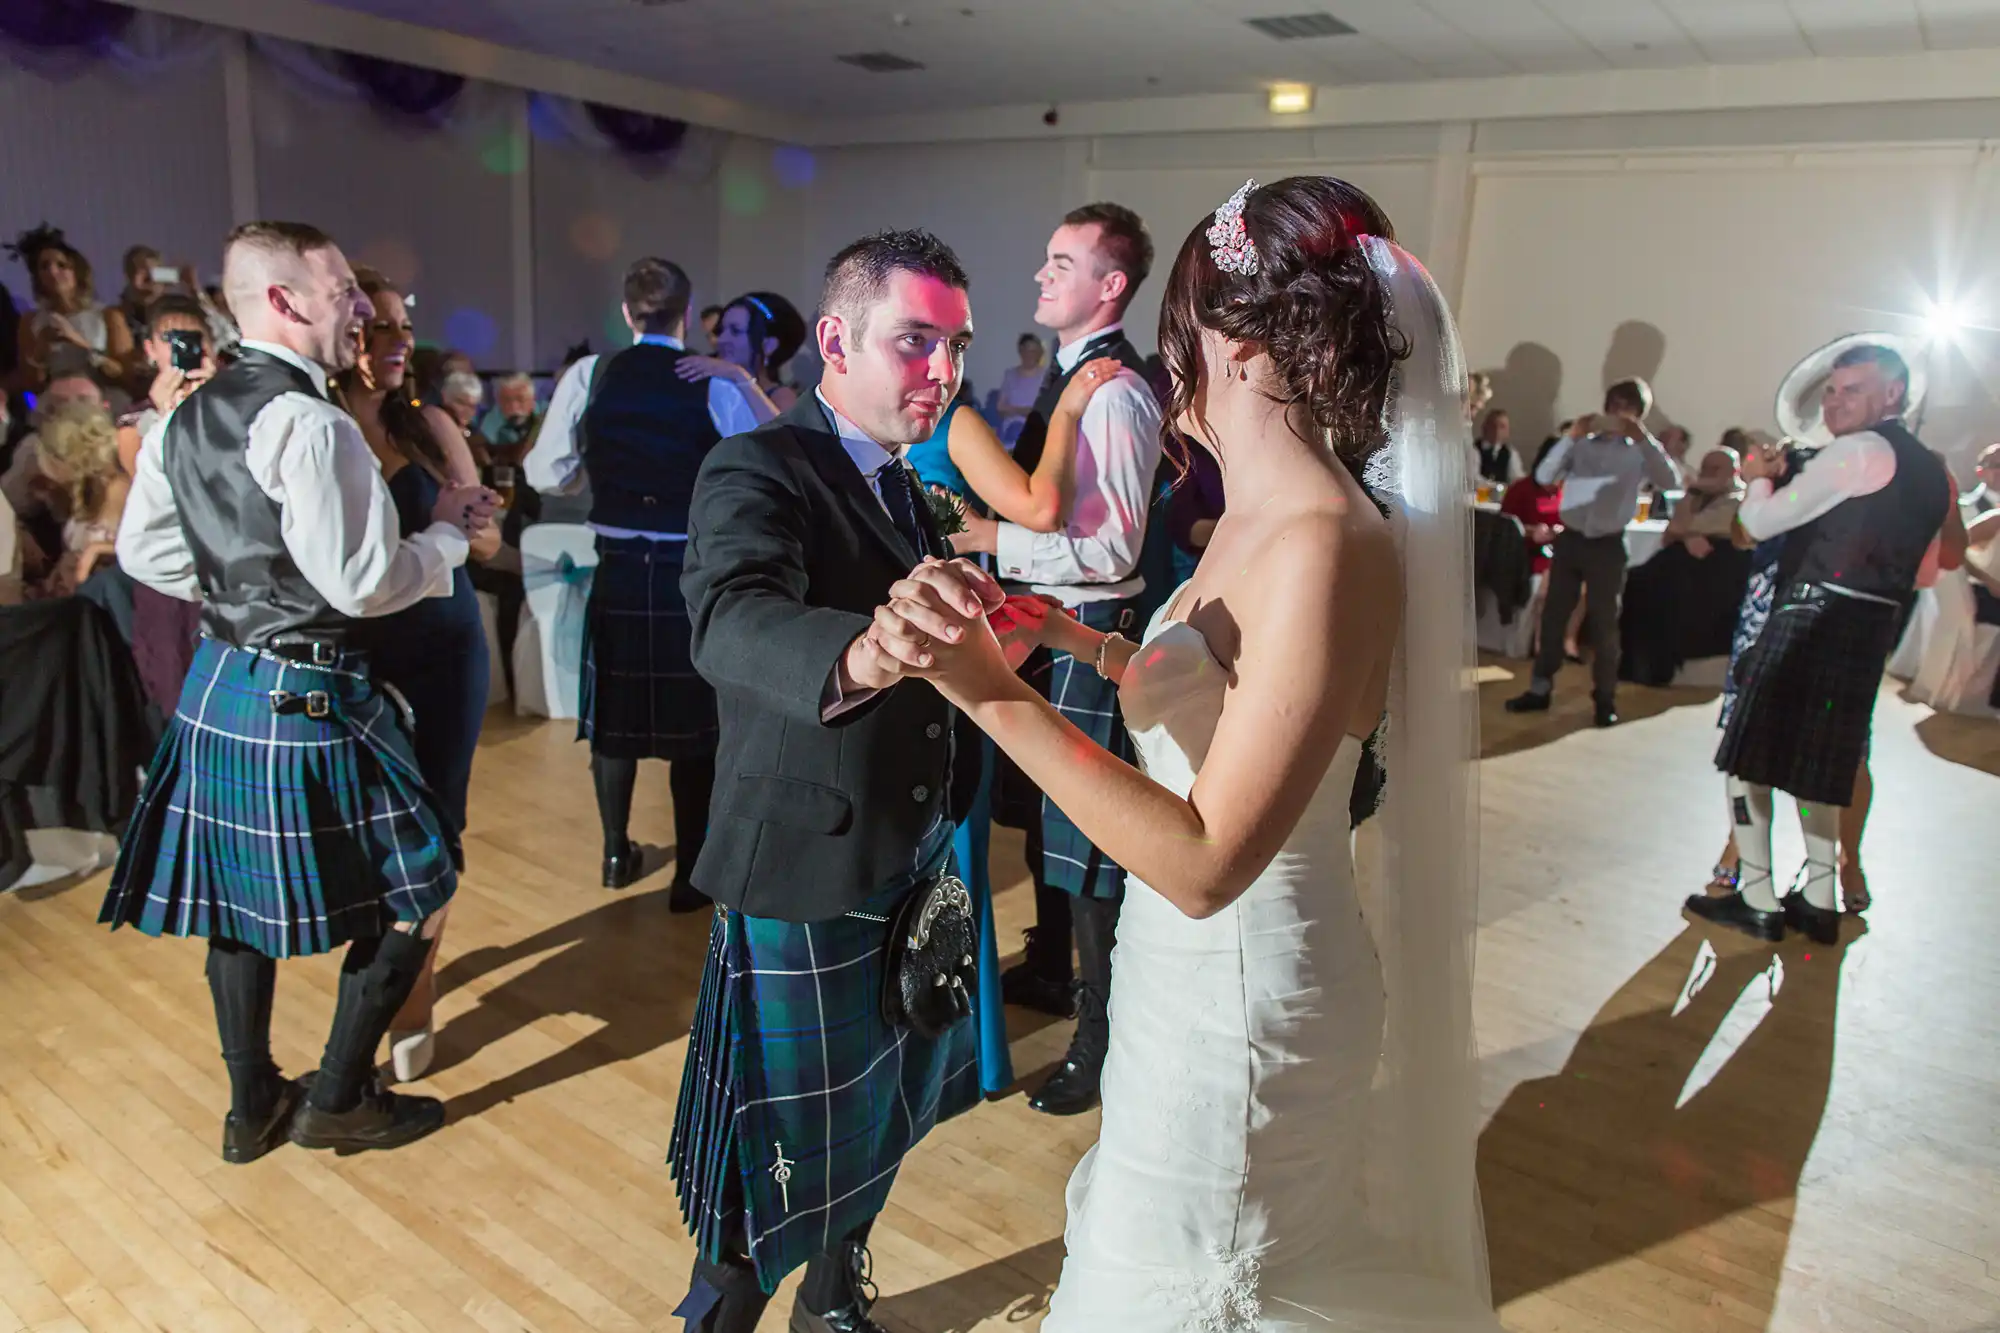 Bride and groom dancing at their wedding reception, surrounded by guests in scottish kilts and modern attire.